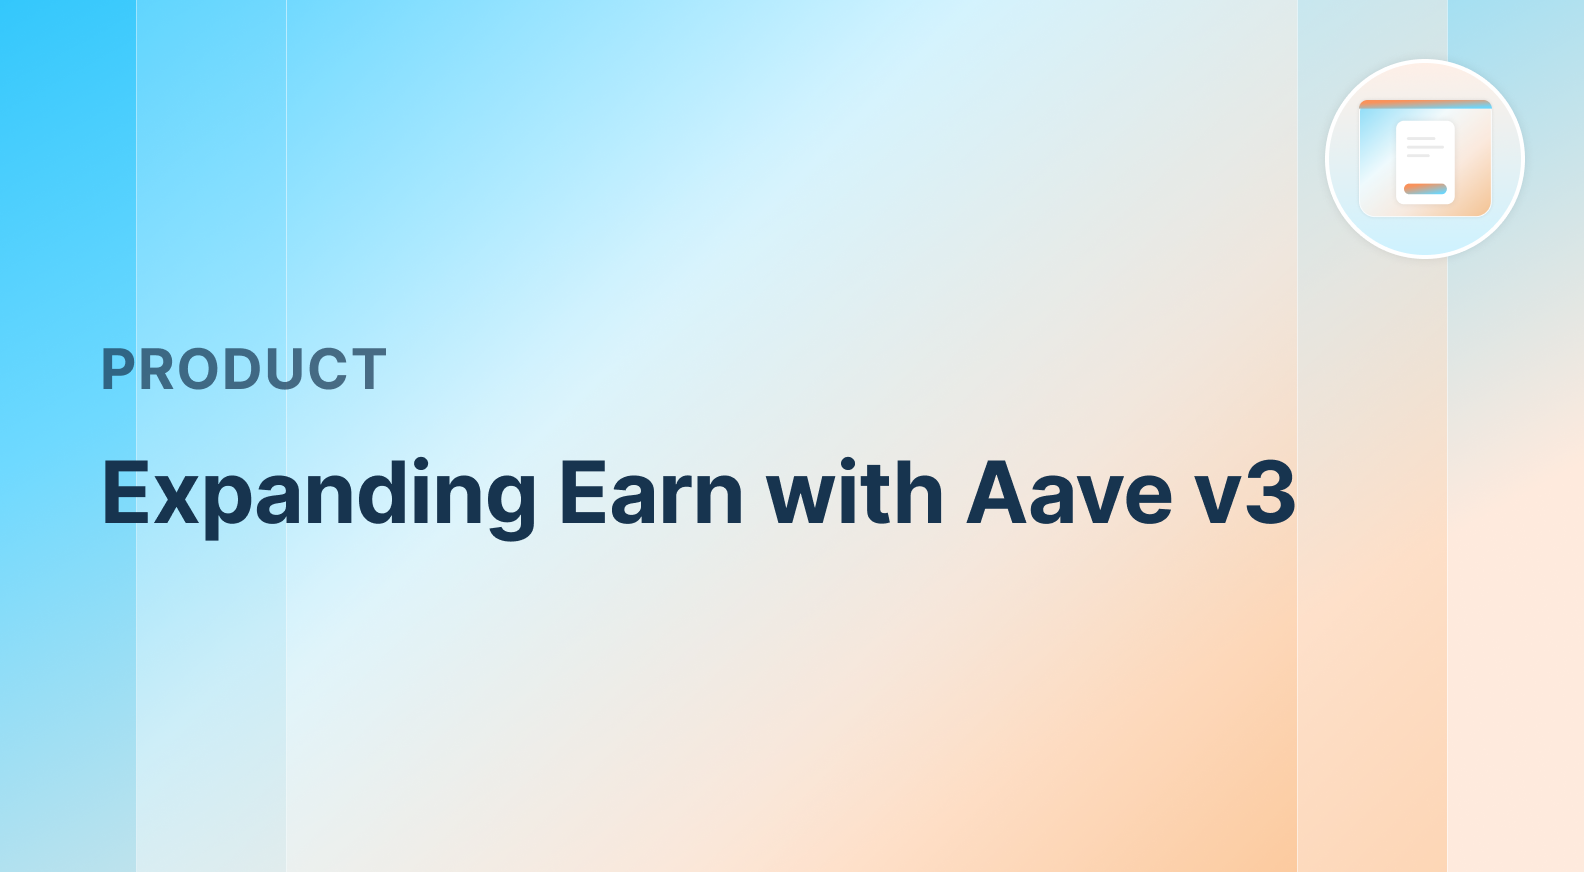 Expanding EARN with Aave V3